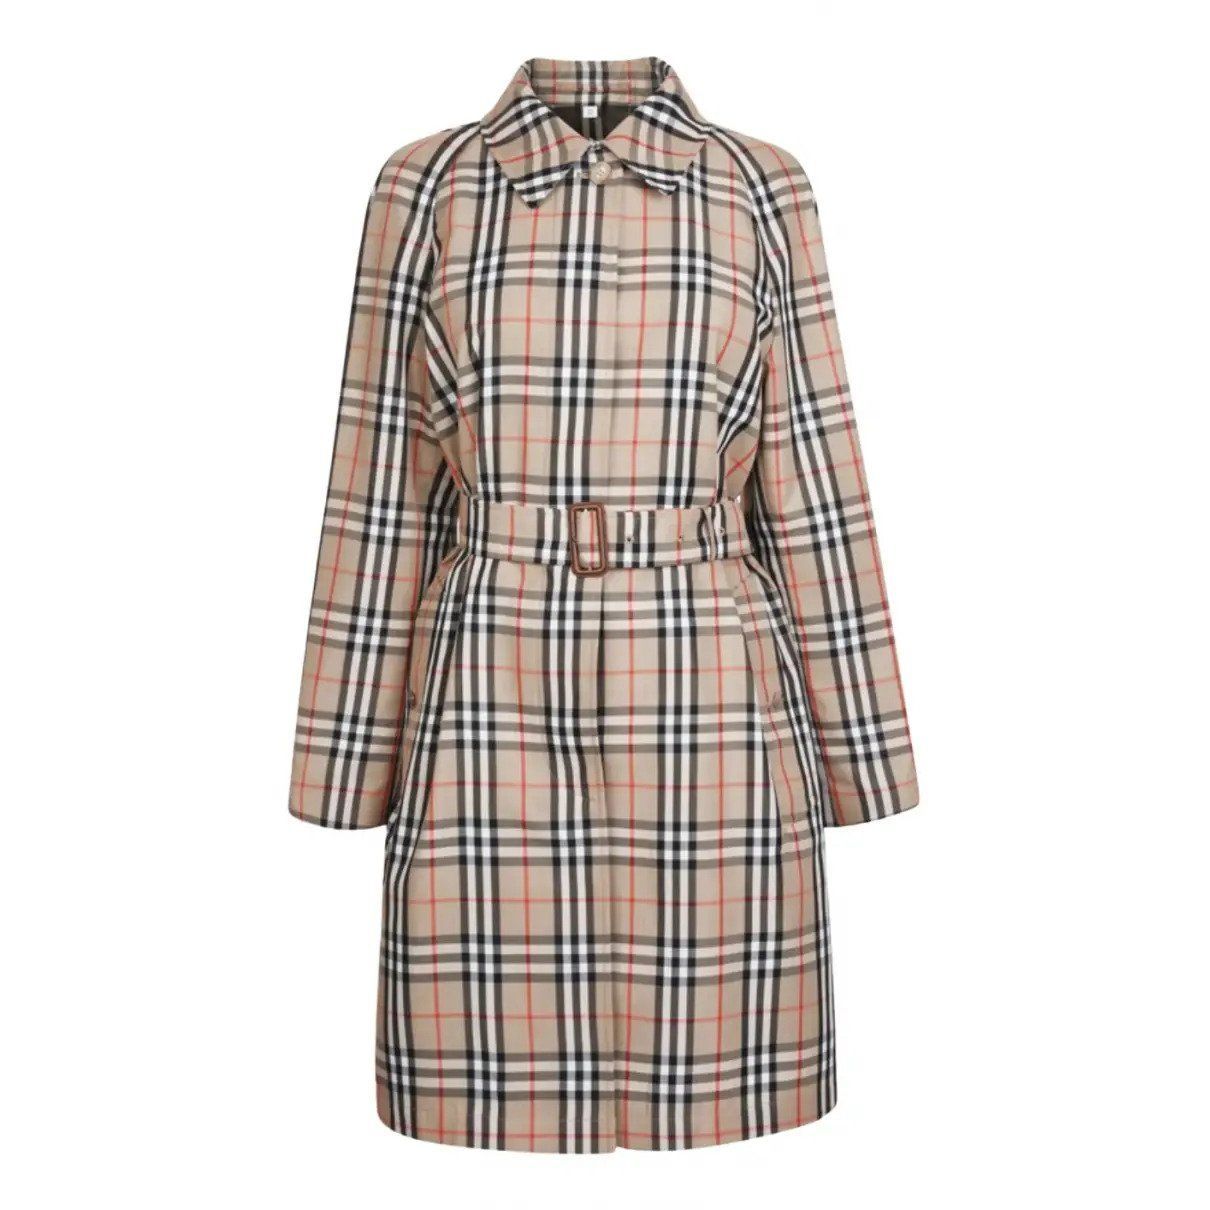 Where to buy a Burberry trench, and a look at its history